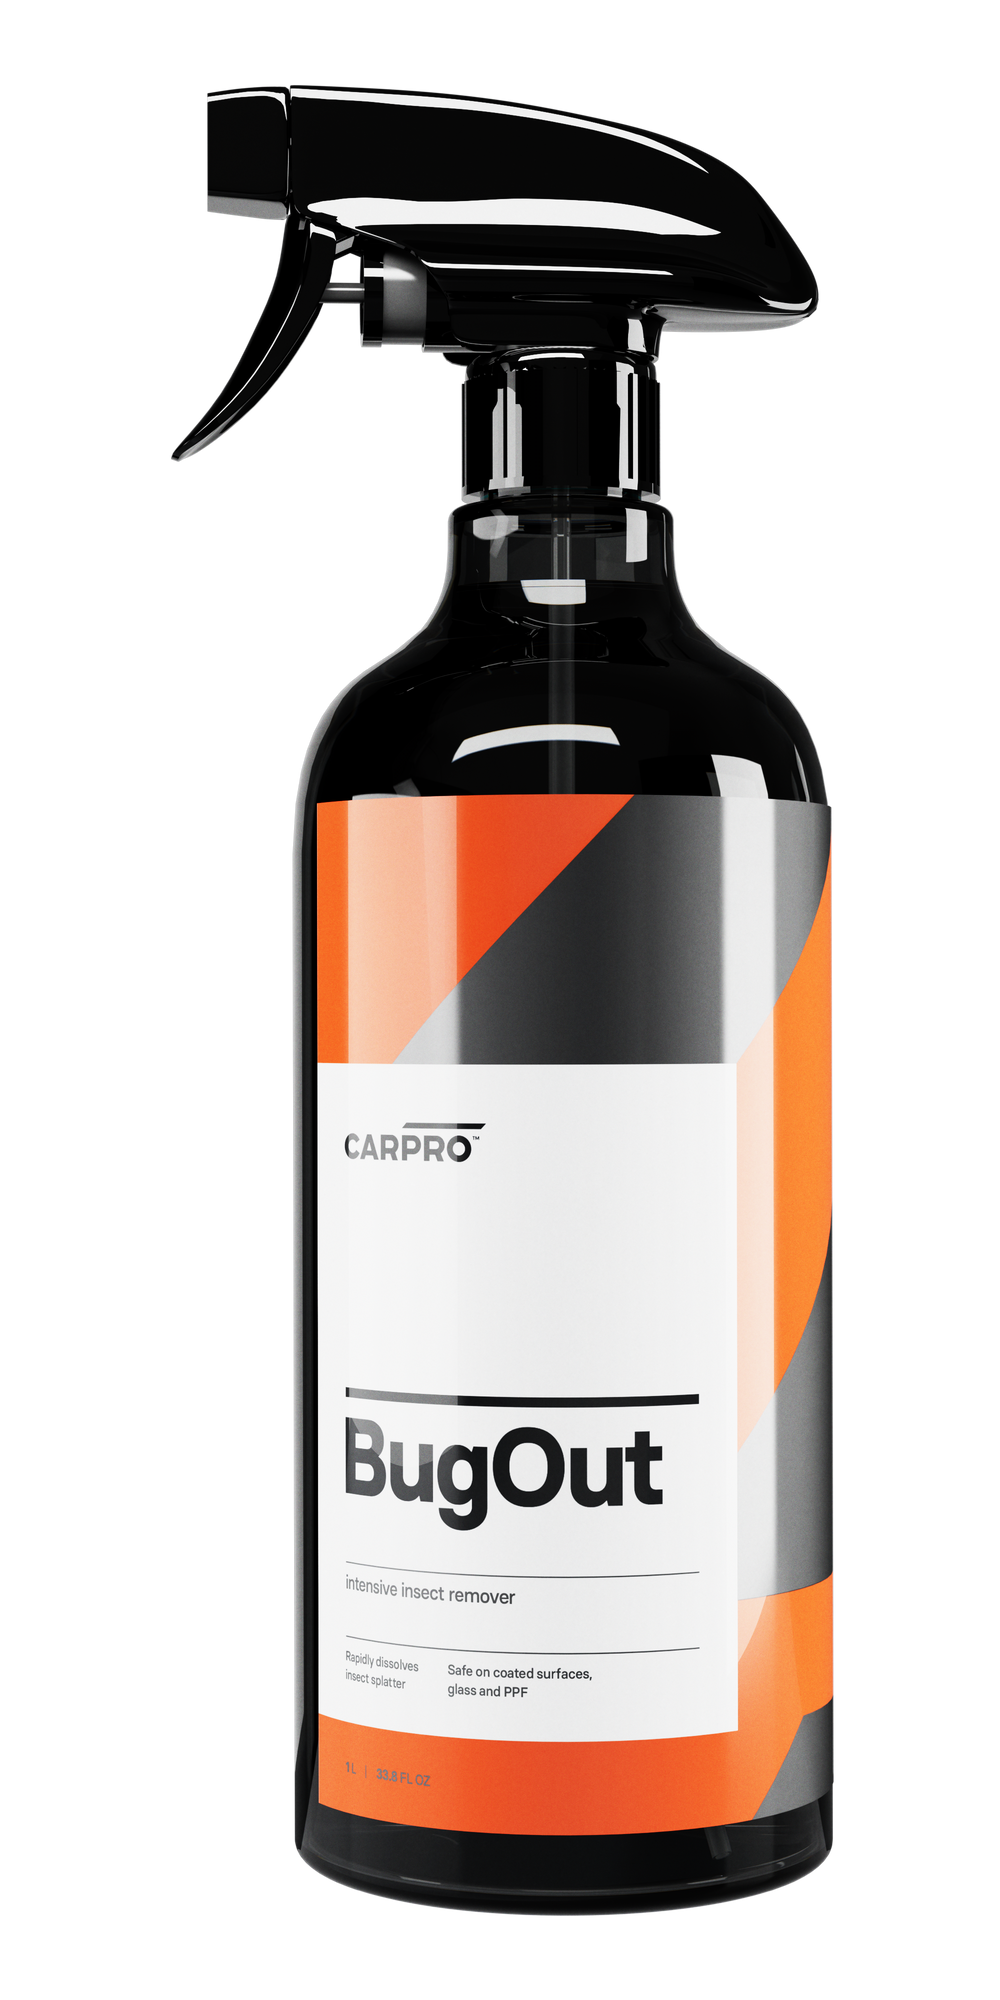 CARPRO BugOut 1L - Insect remover